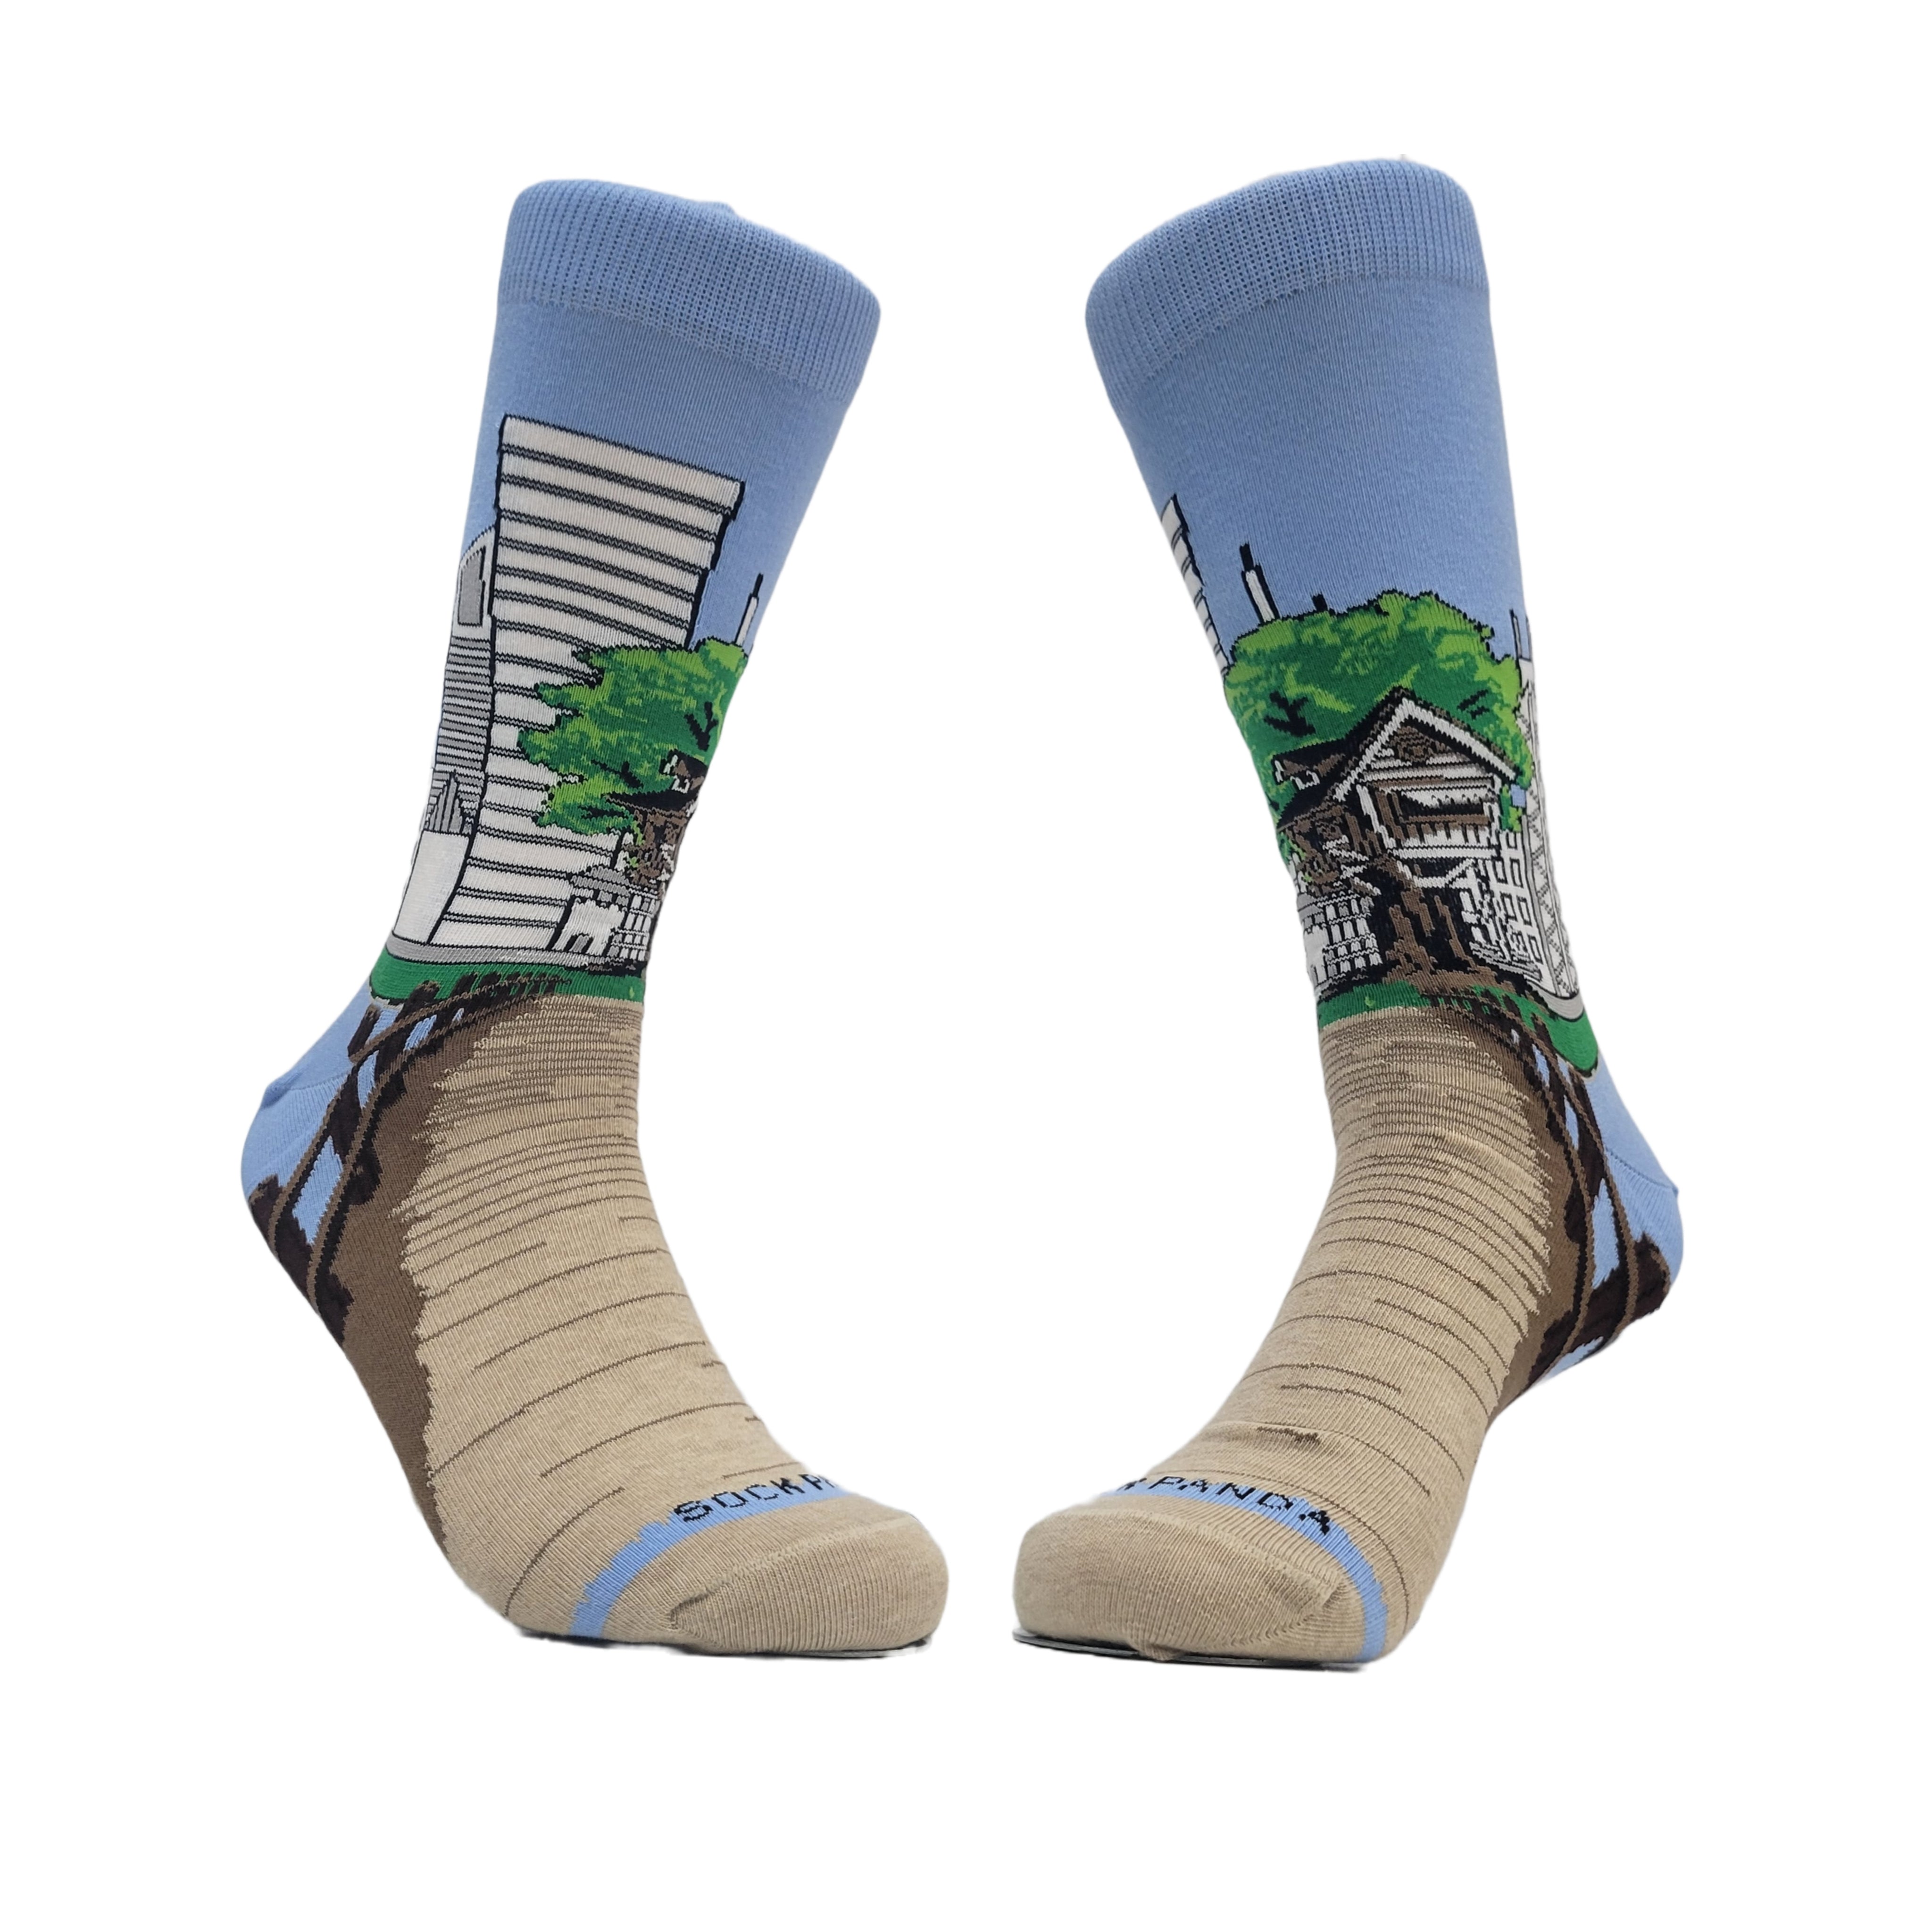 Treehouse in the City Socks from the Sock Panda (Adult Large)